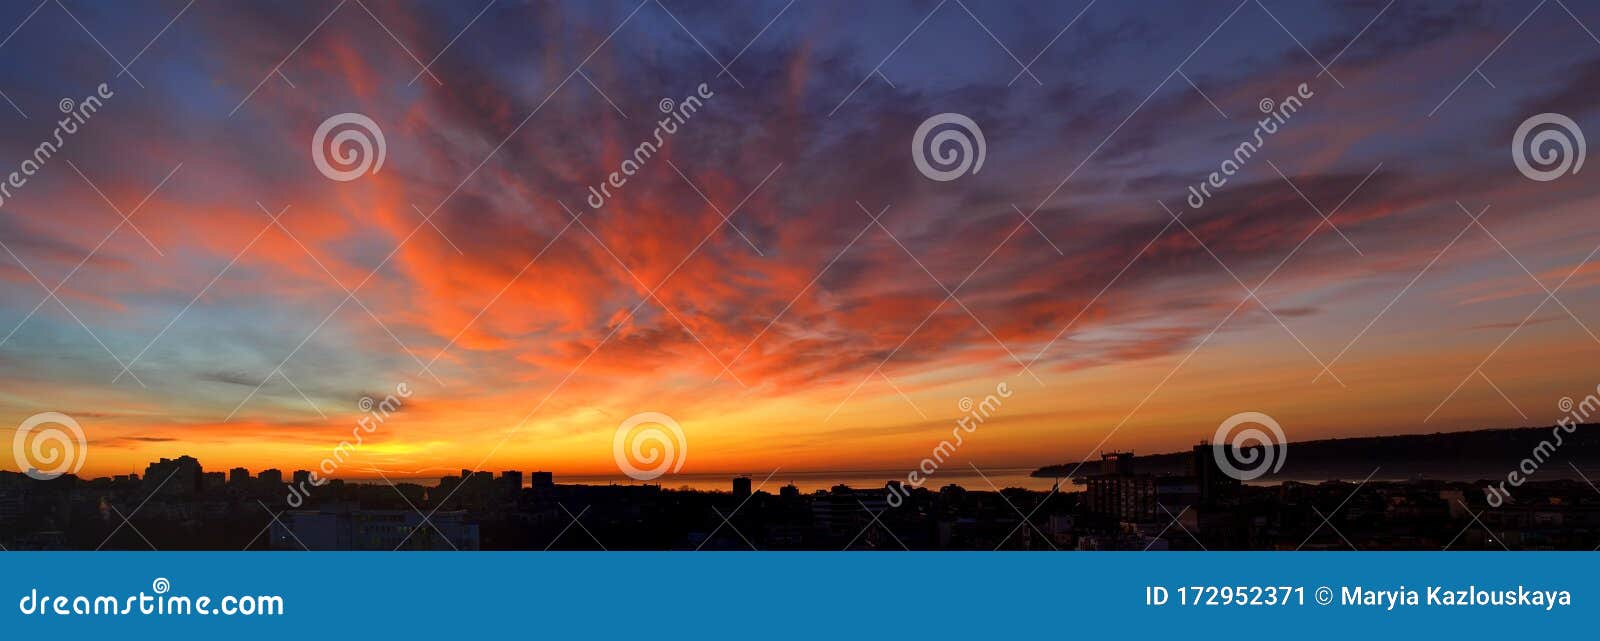 panorama of dawn fire in the sky over a small seaside city. golden red clouds just before the sunrise. scenic landscape at sunrise